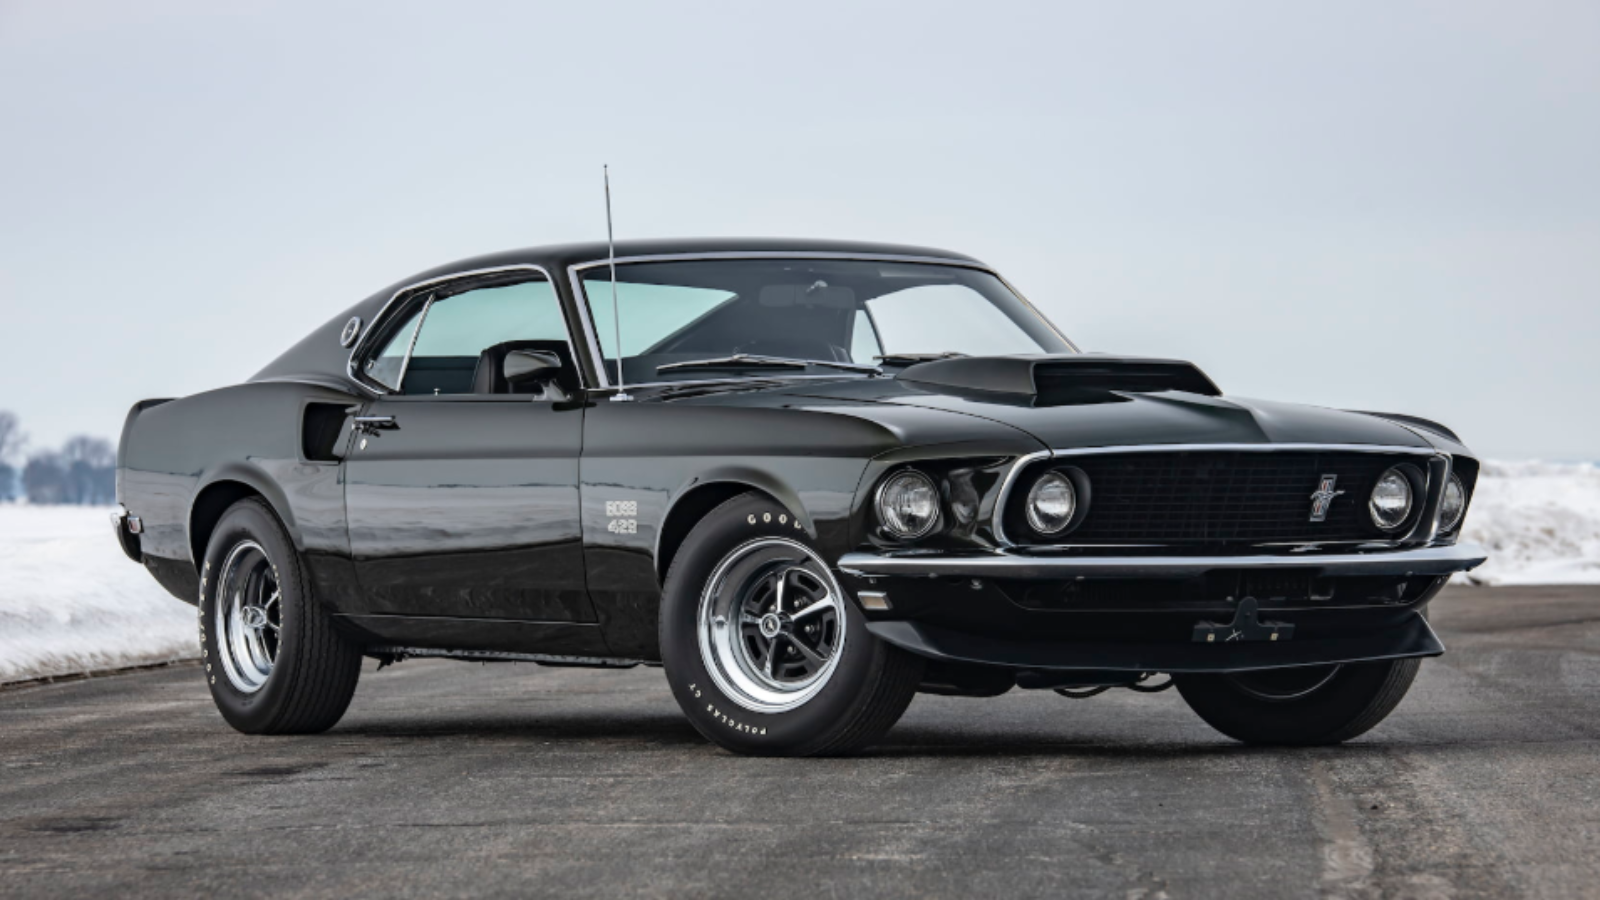 1969 Mustang BOSS 429 is a Stunning Fastback - The Mustang Source ...